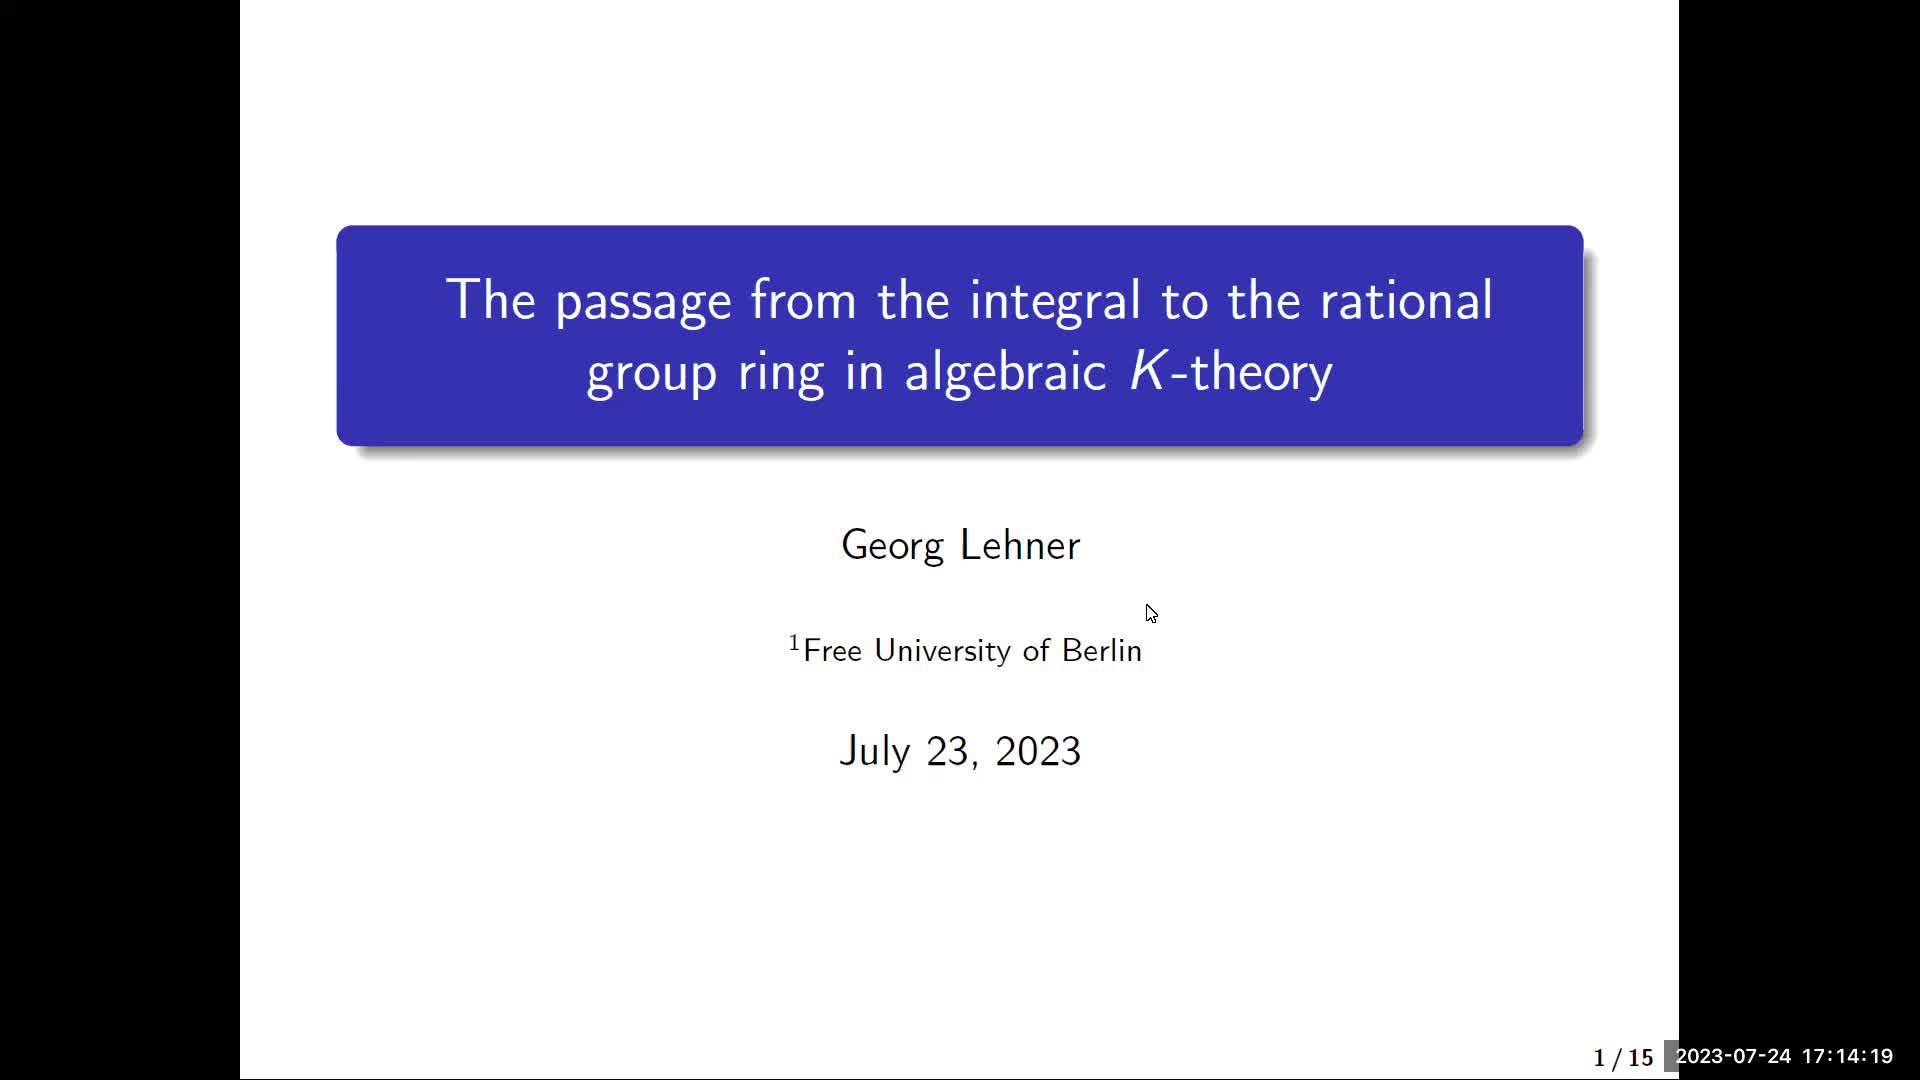 Georg Lehner: The passage from the integral to the rational group ring in algebraic K-theory